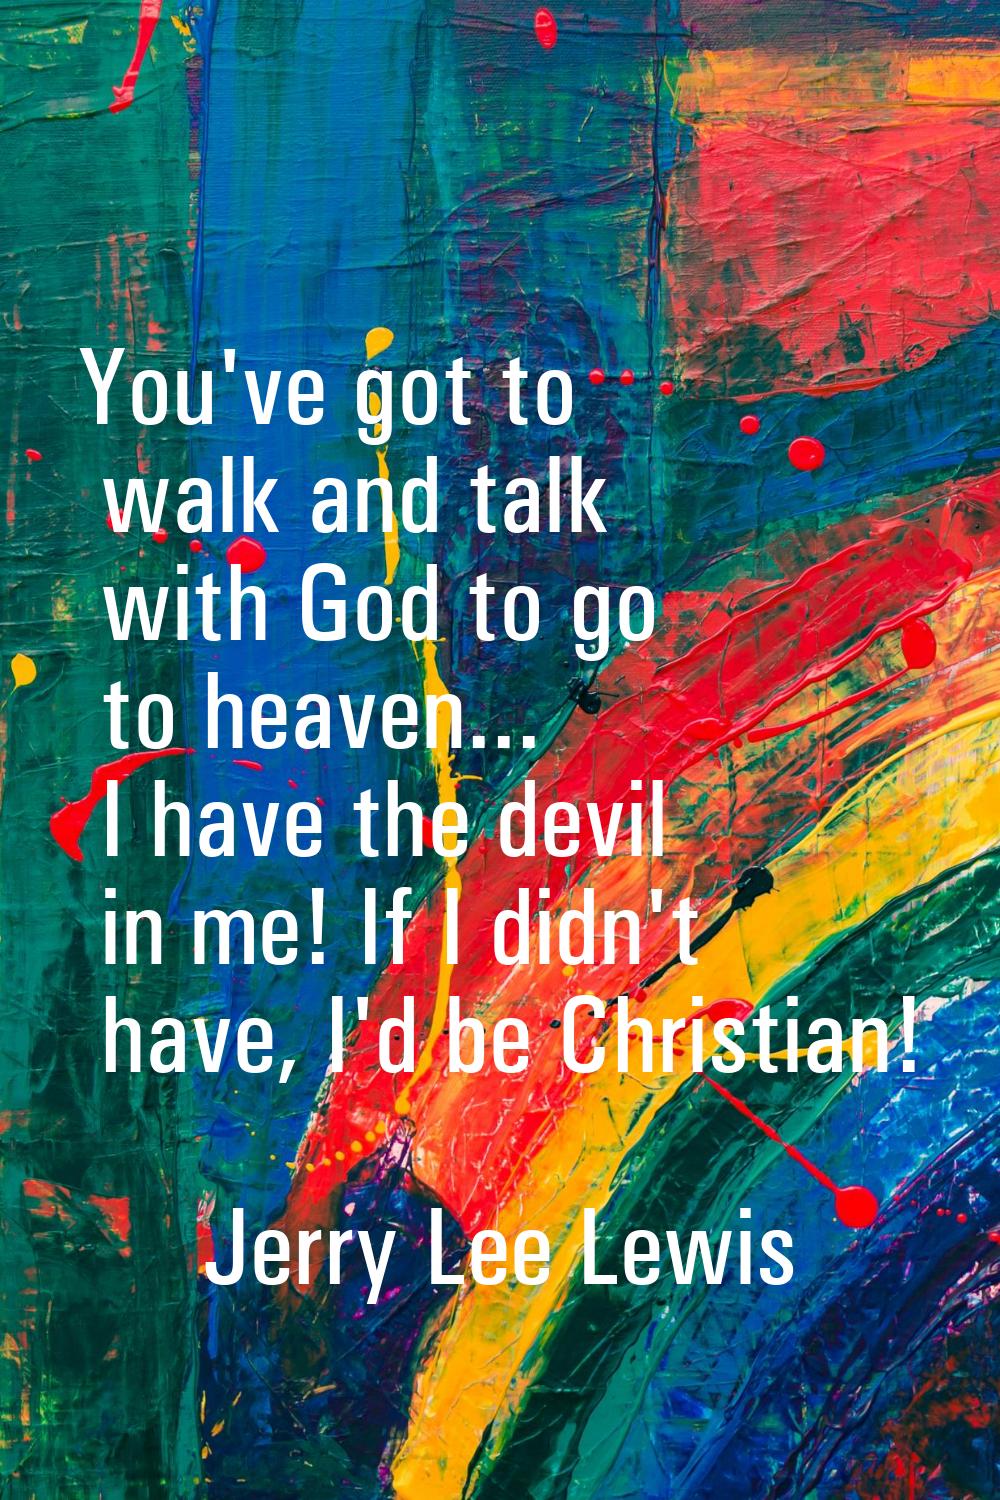 You've got to walk and talk with God to go to heaven... I have the devil in me! If I didn't have, I